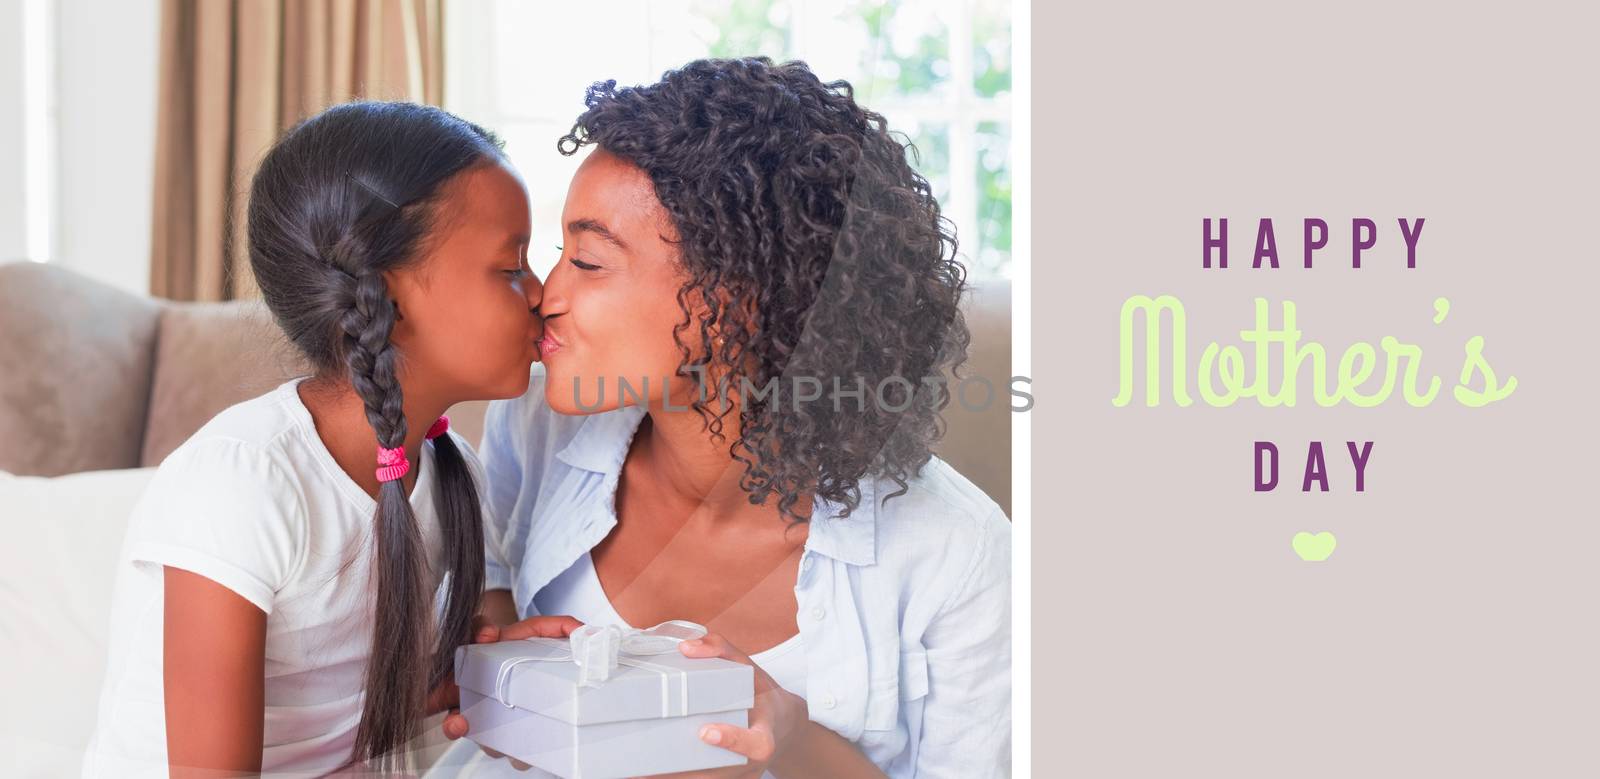 mothers day greeting against pretty mother sitting on couch offering daughter a gift